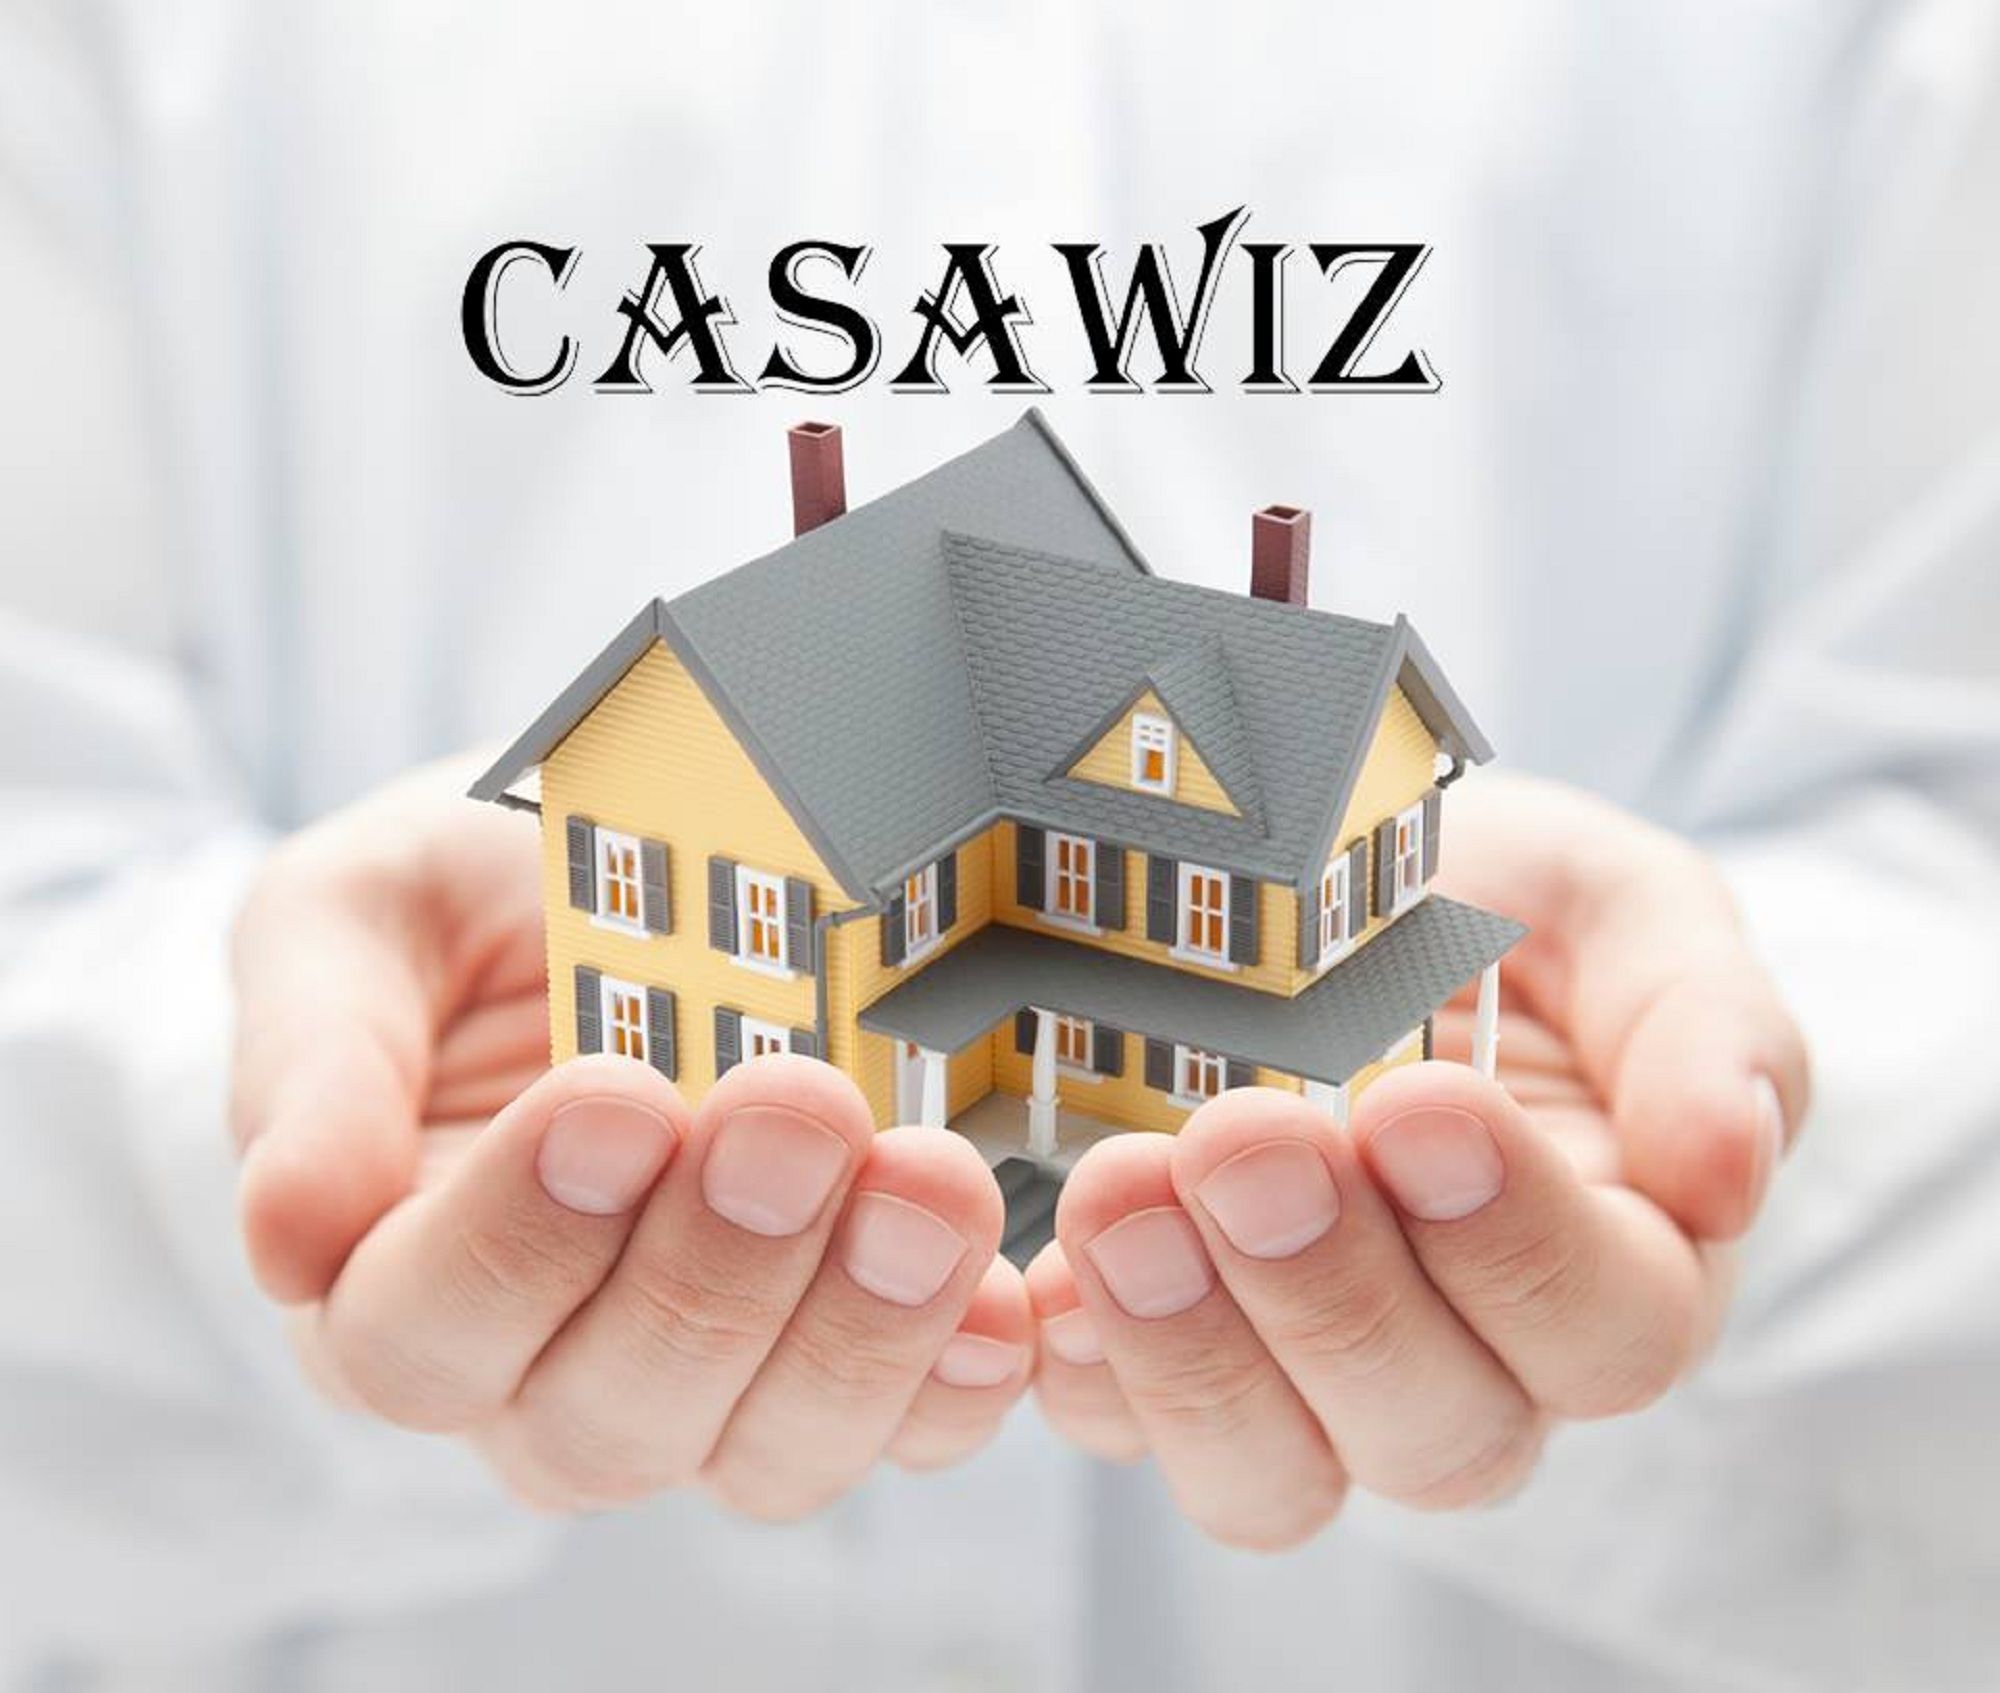 CasaWiz was developed to aid in the purchase and sale of residential ...